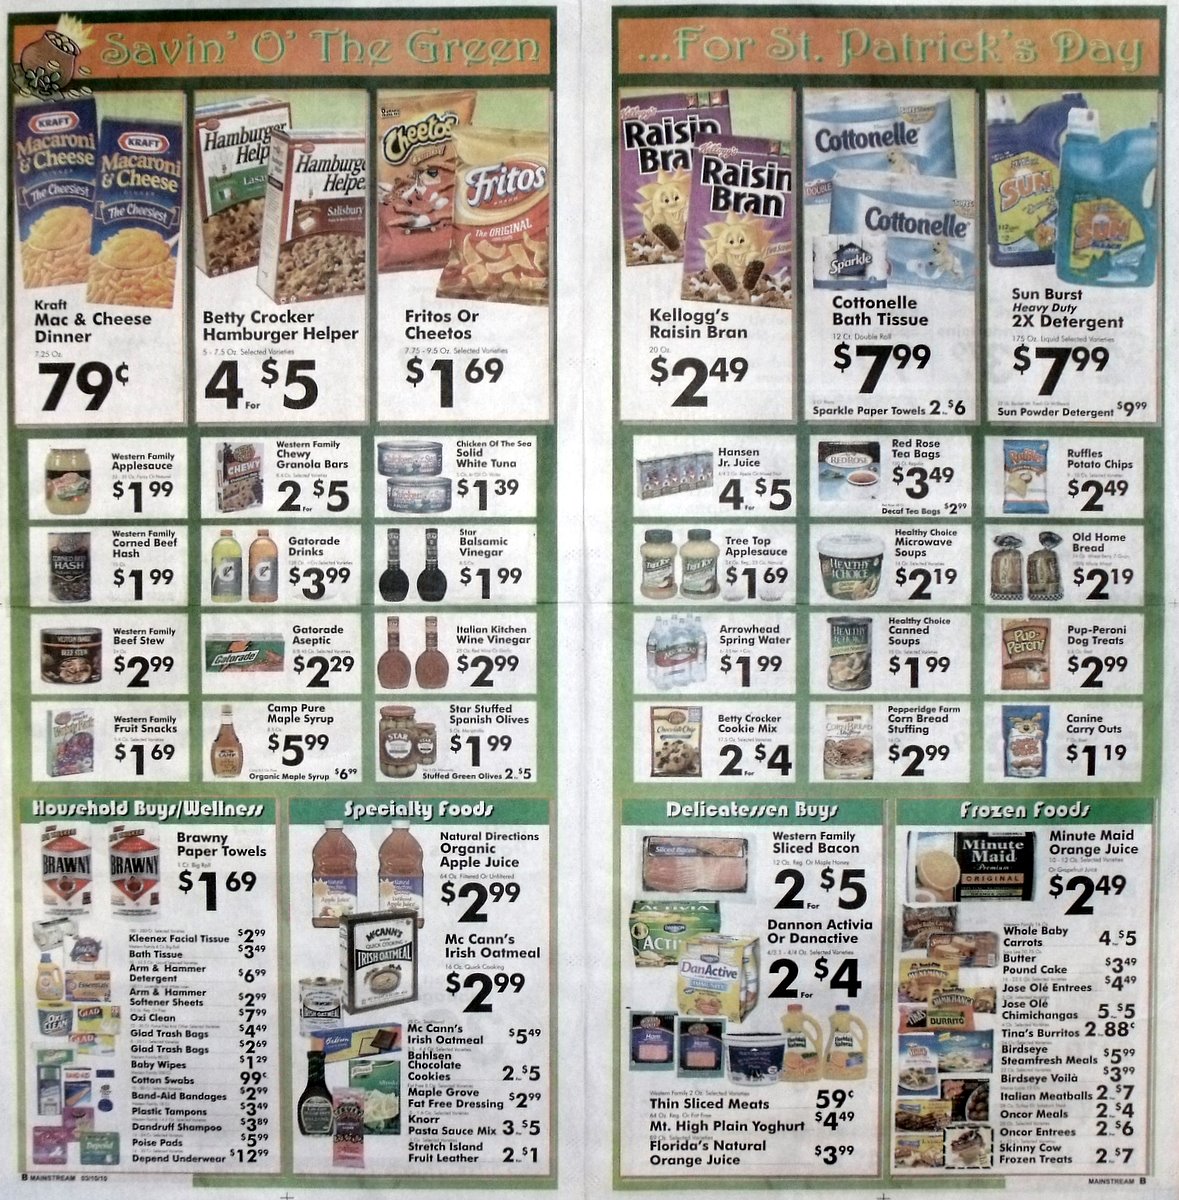 Big Trees Market Weekly Ad For March 17 - 23, 2010